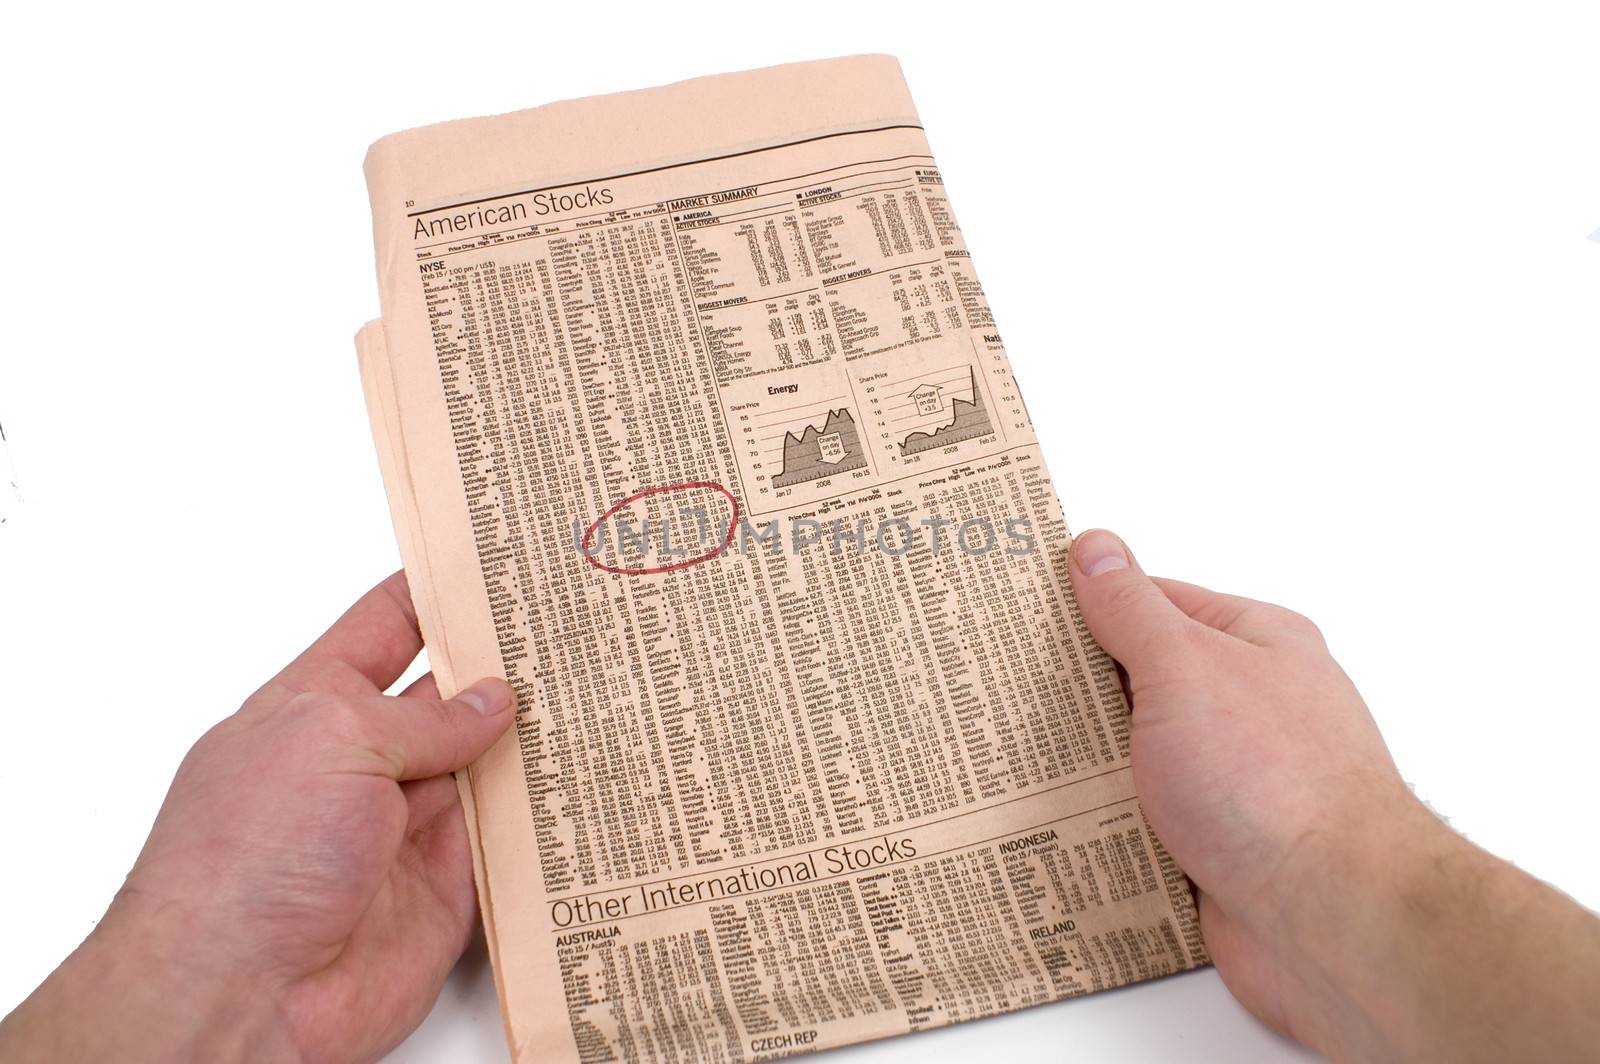 Male hands circle stock information in a newspaper against a white background.